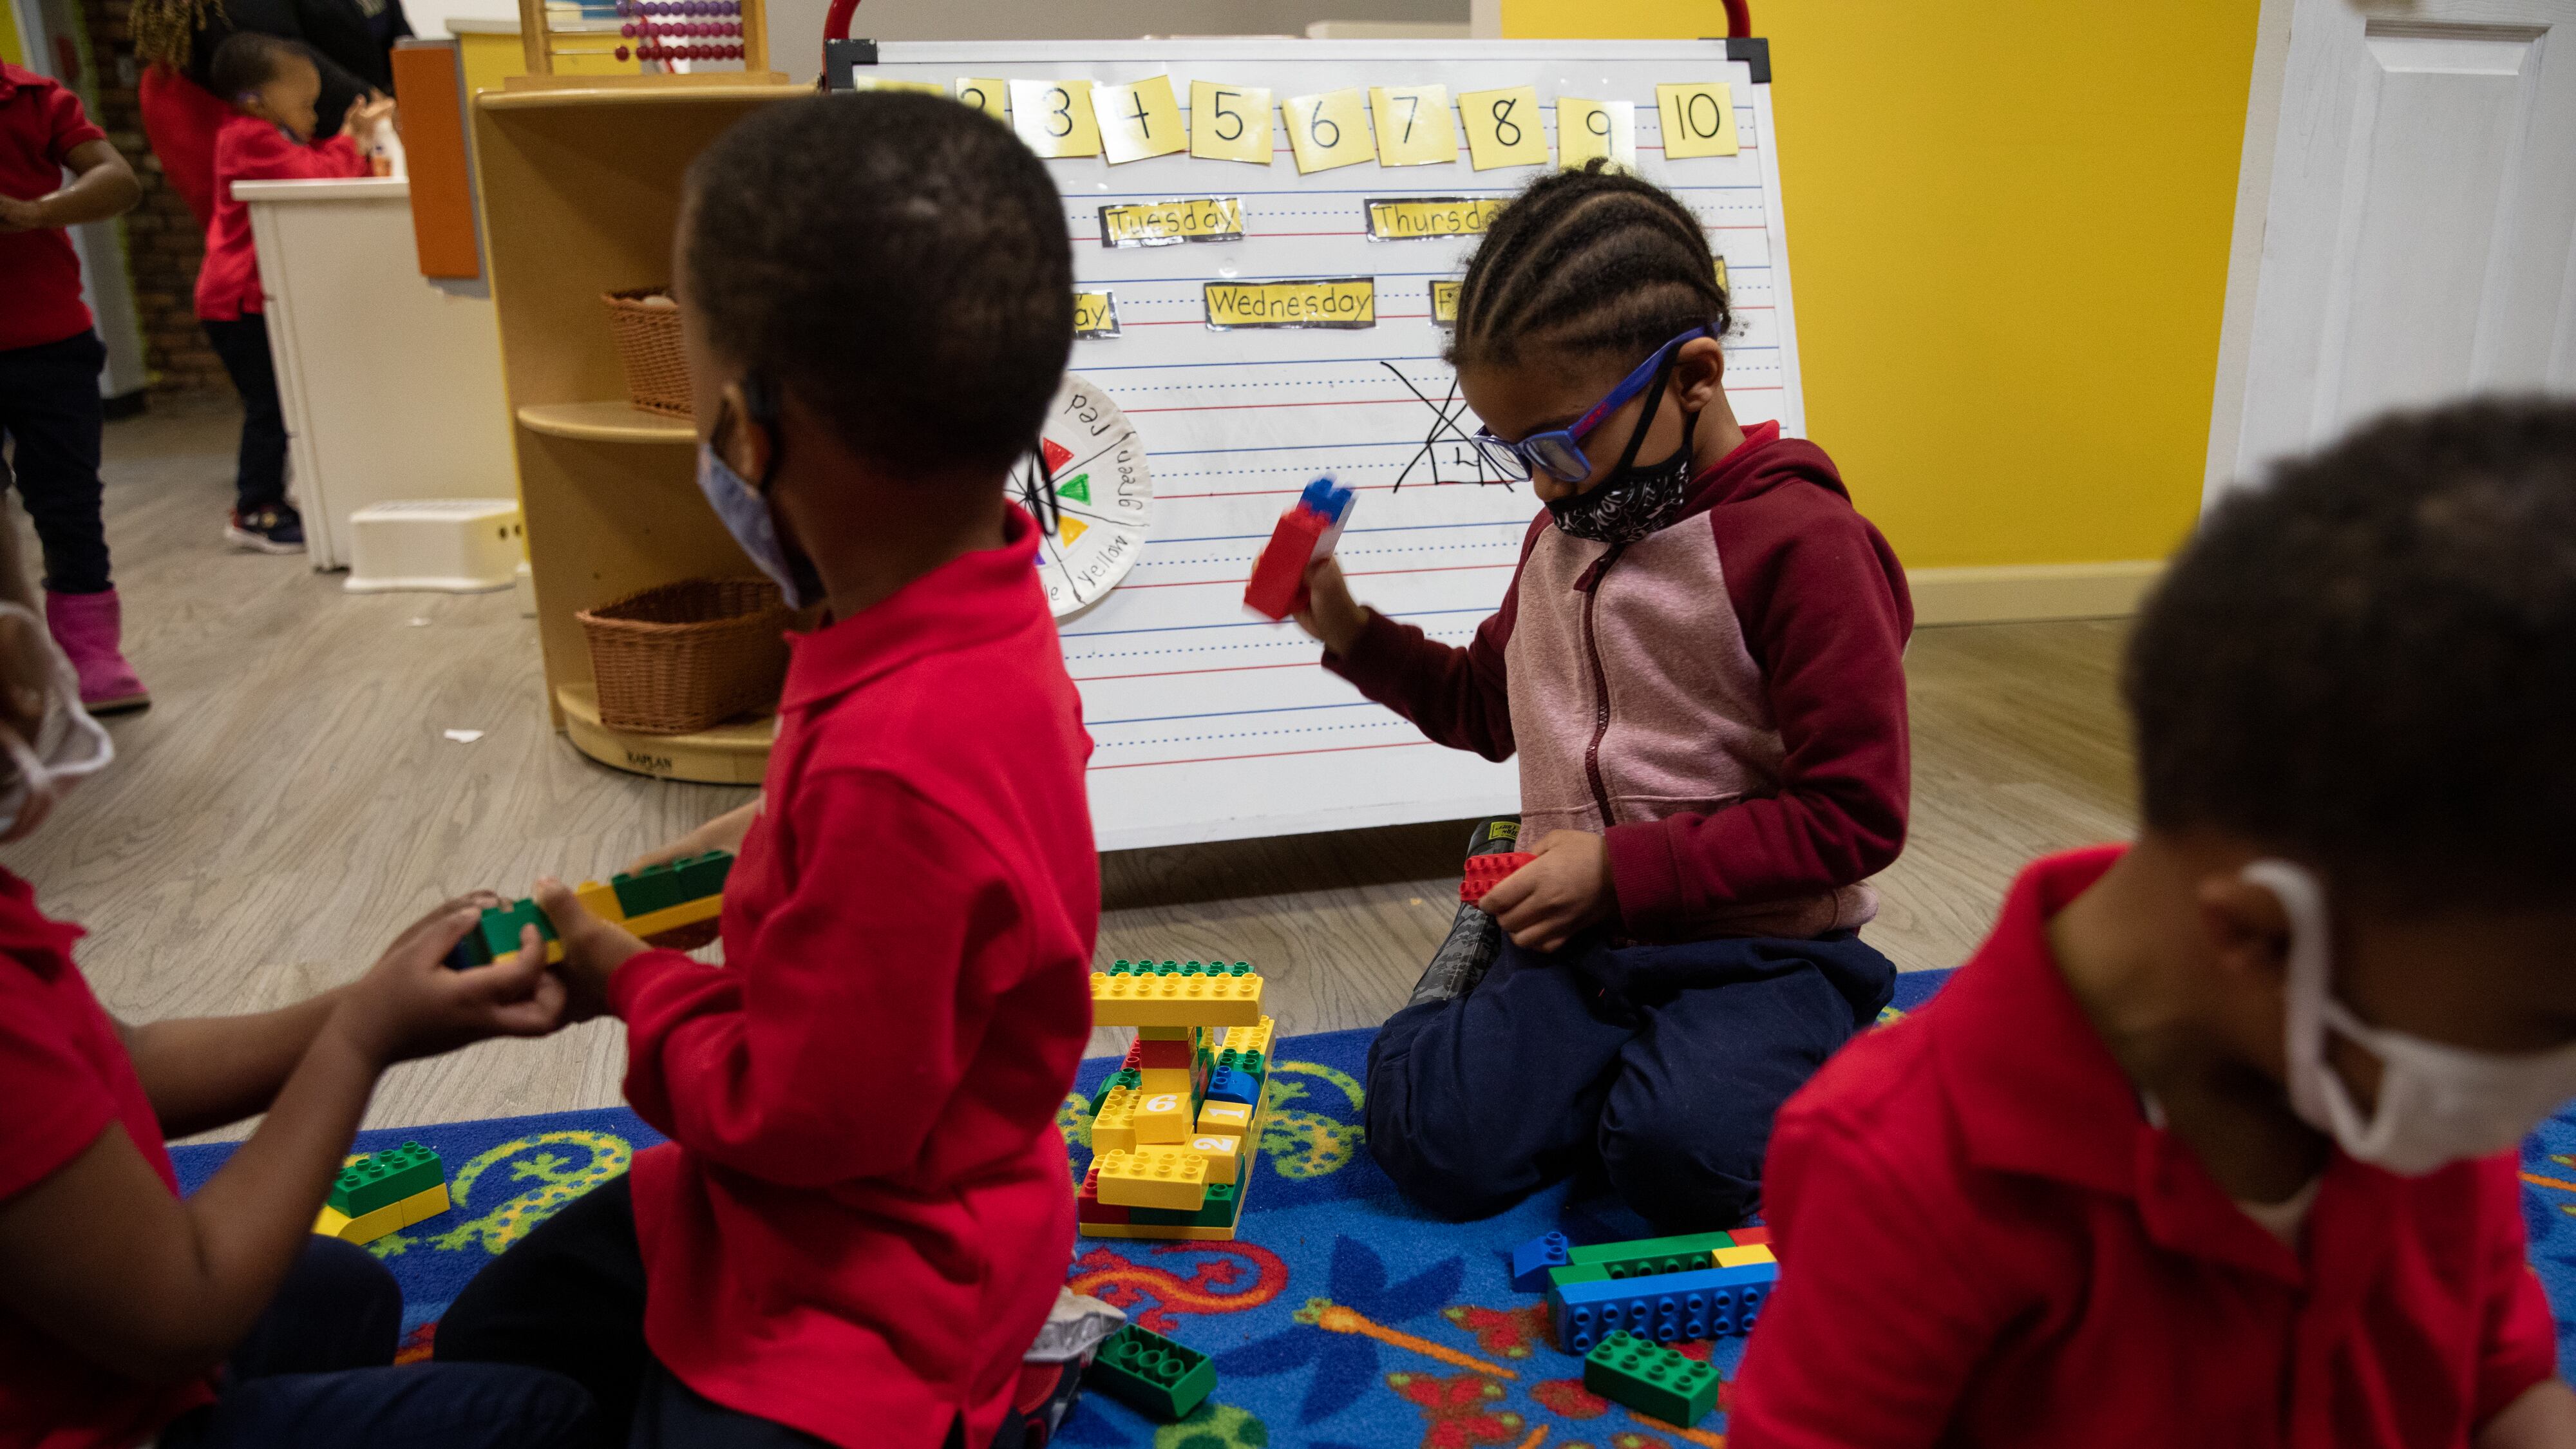 A young student plays with legos among other preschoolers at Little Scholars child care center in Detroit, Michigan, U.S., on Thursday April 1, 2021.